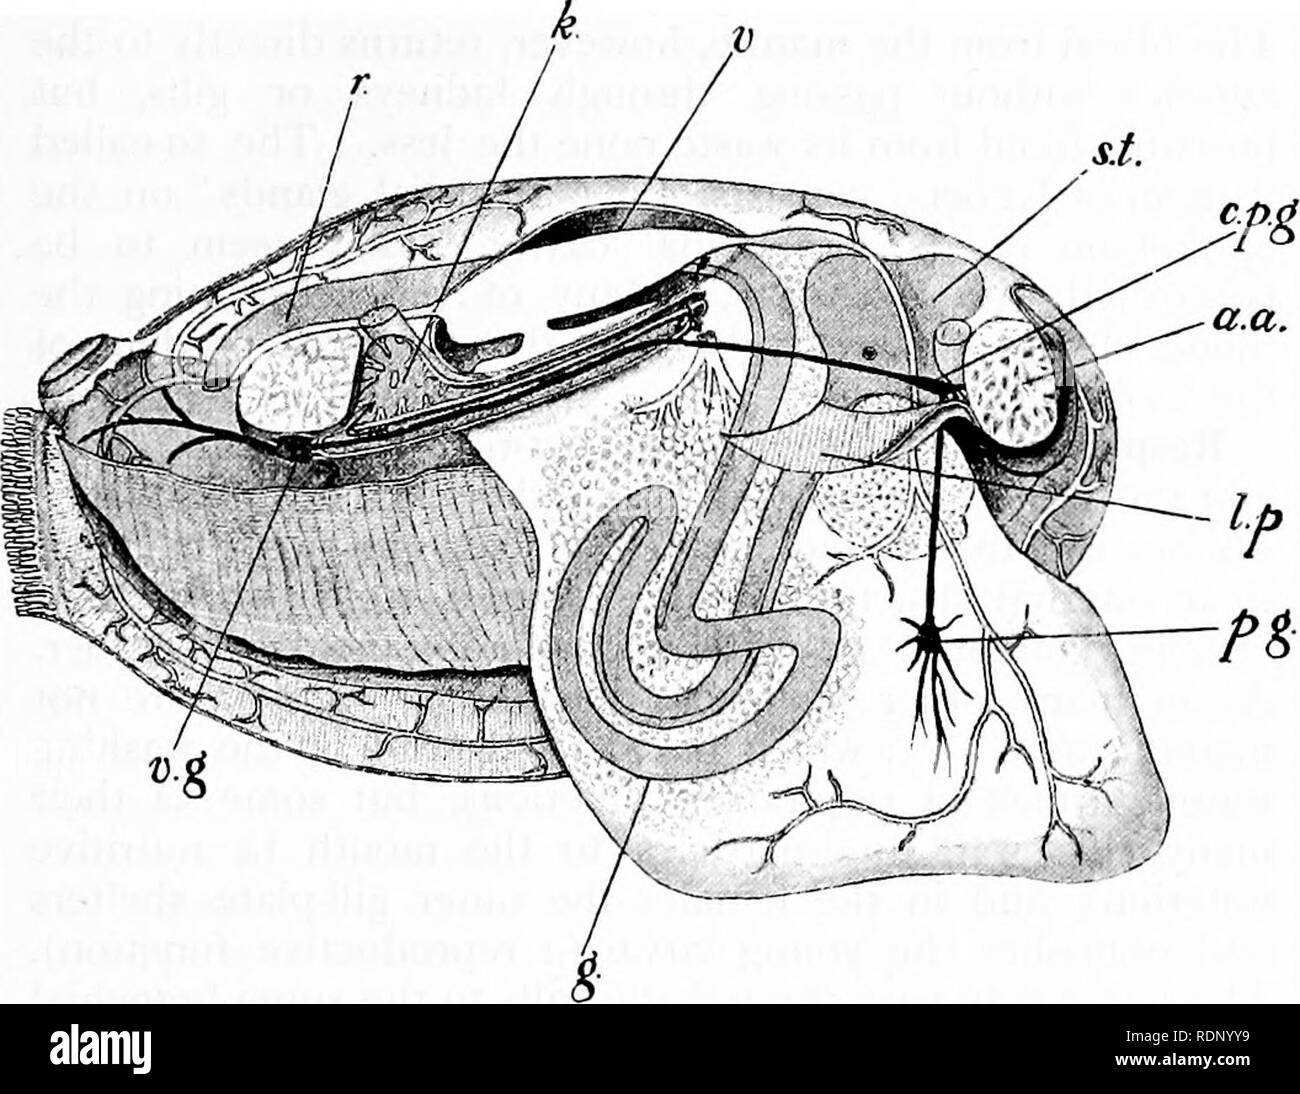 . Outlines of zoology. Zoology. VASCULAR SYSTEM. 35i intestine, which has in part a folded wall like that of the earthworm coils about in the foot, ascends to the peri- cardium, passes through the ventricle of the heart, and ends above the posterior adductor at the exhalant orifice. Vascular system.—The heart lies in the middle line on. FrG. 153.—Structure of Anodonta.—After Rankin. «.«., Anterior adductor; c.j*.r., cerebro-pleural ganglia; st., stomach ; z»., ventricle, with an auricle opening into it ; k., kidney, above which is the posterior retractor of the foot ; r., rectum ending above p Stock Photo